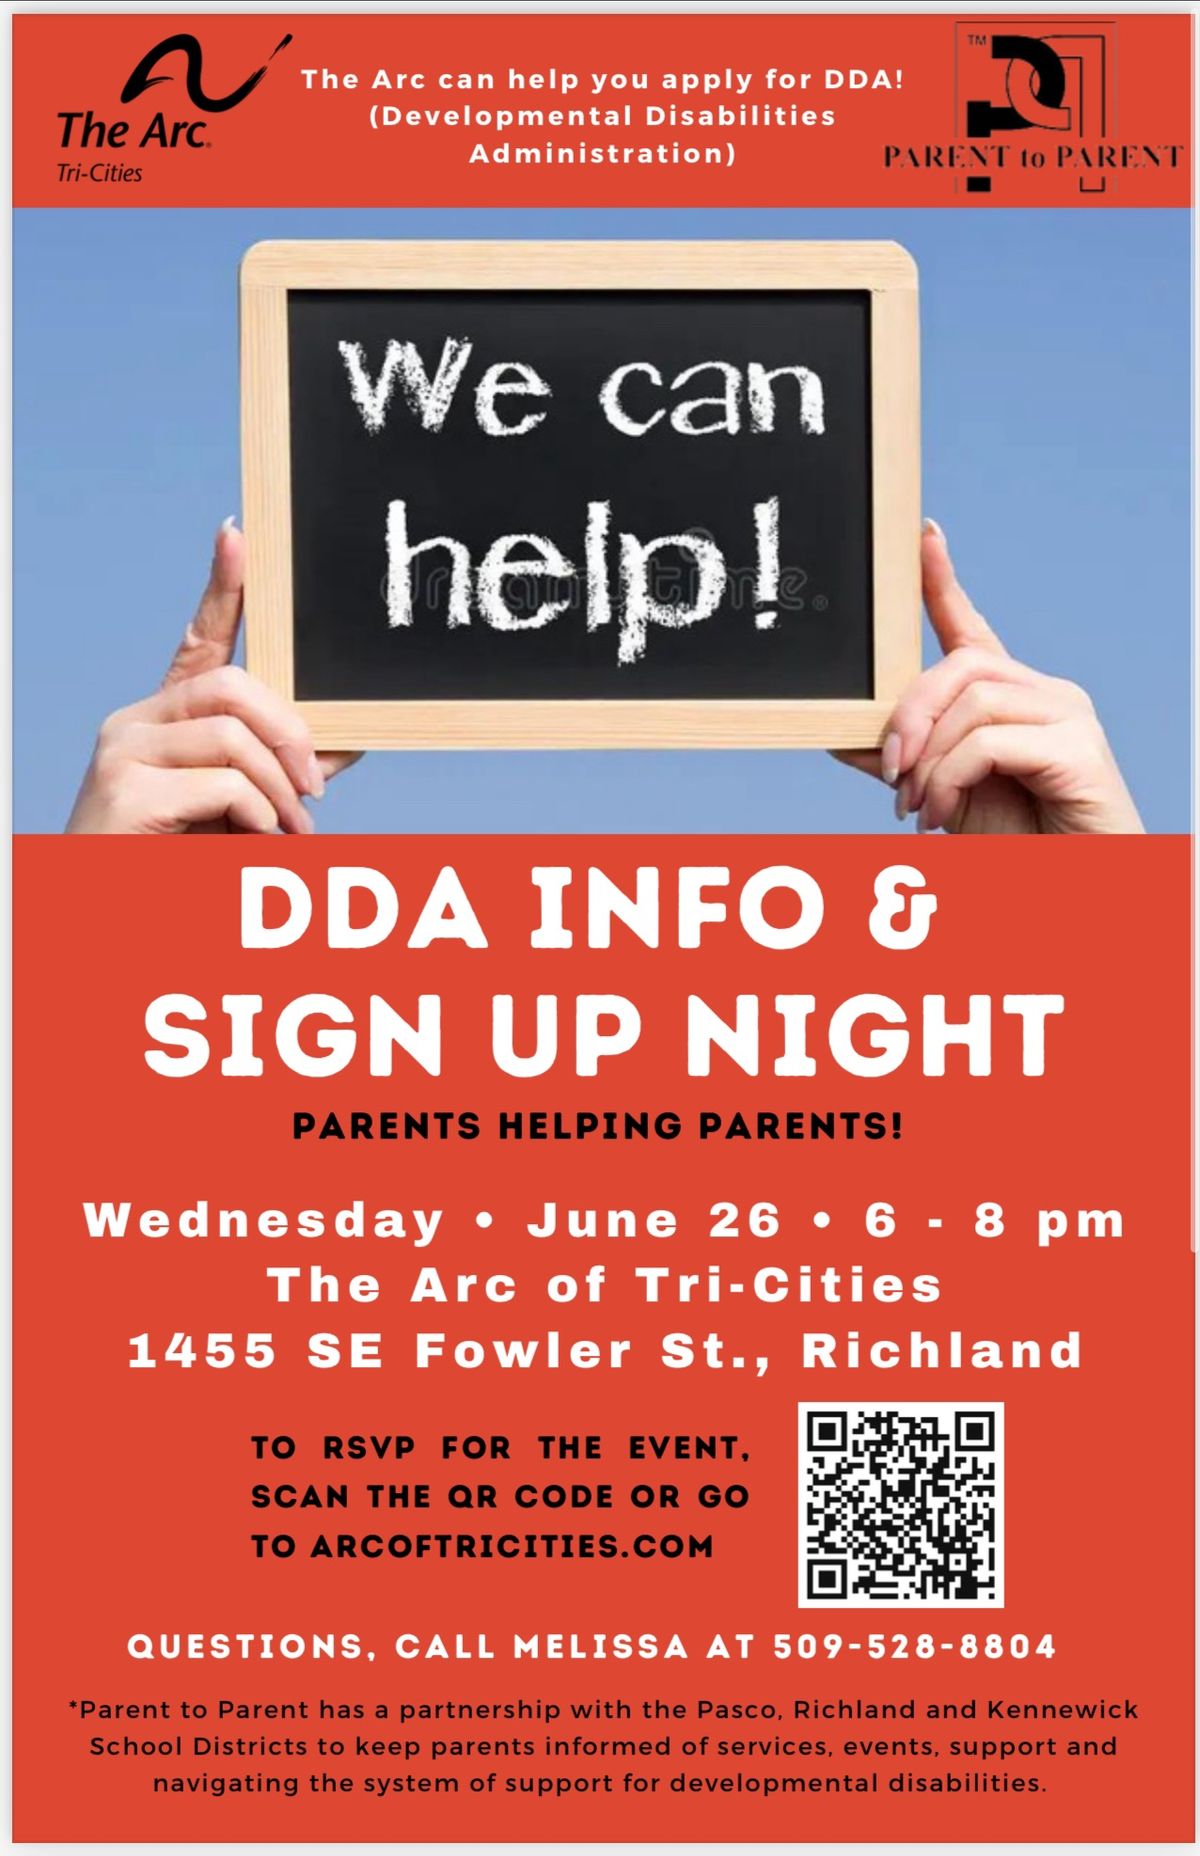 DDA Info and Sign Up Night \u2014 The Arc of Tri-Cities